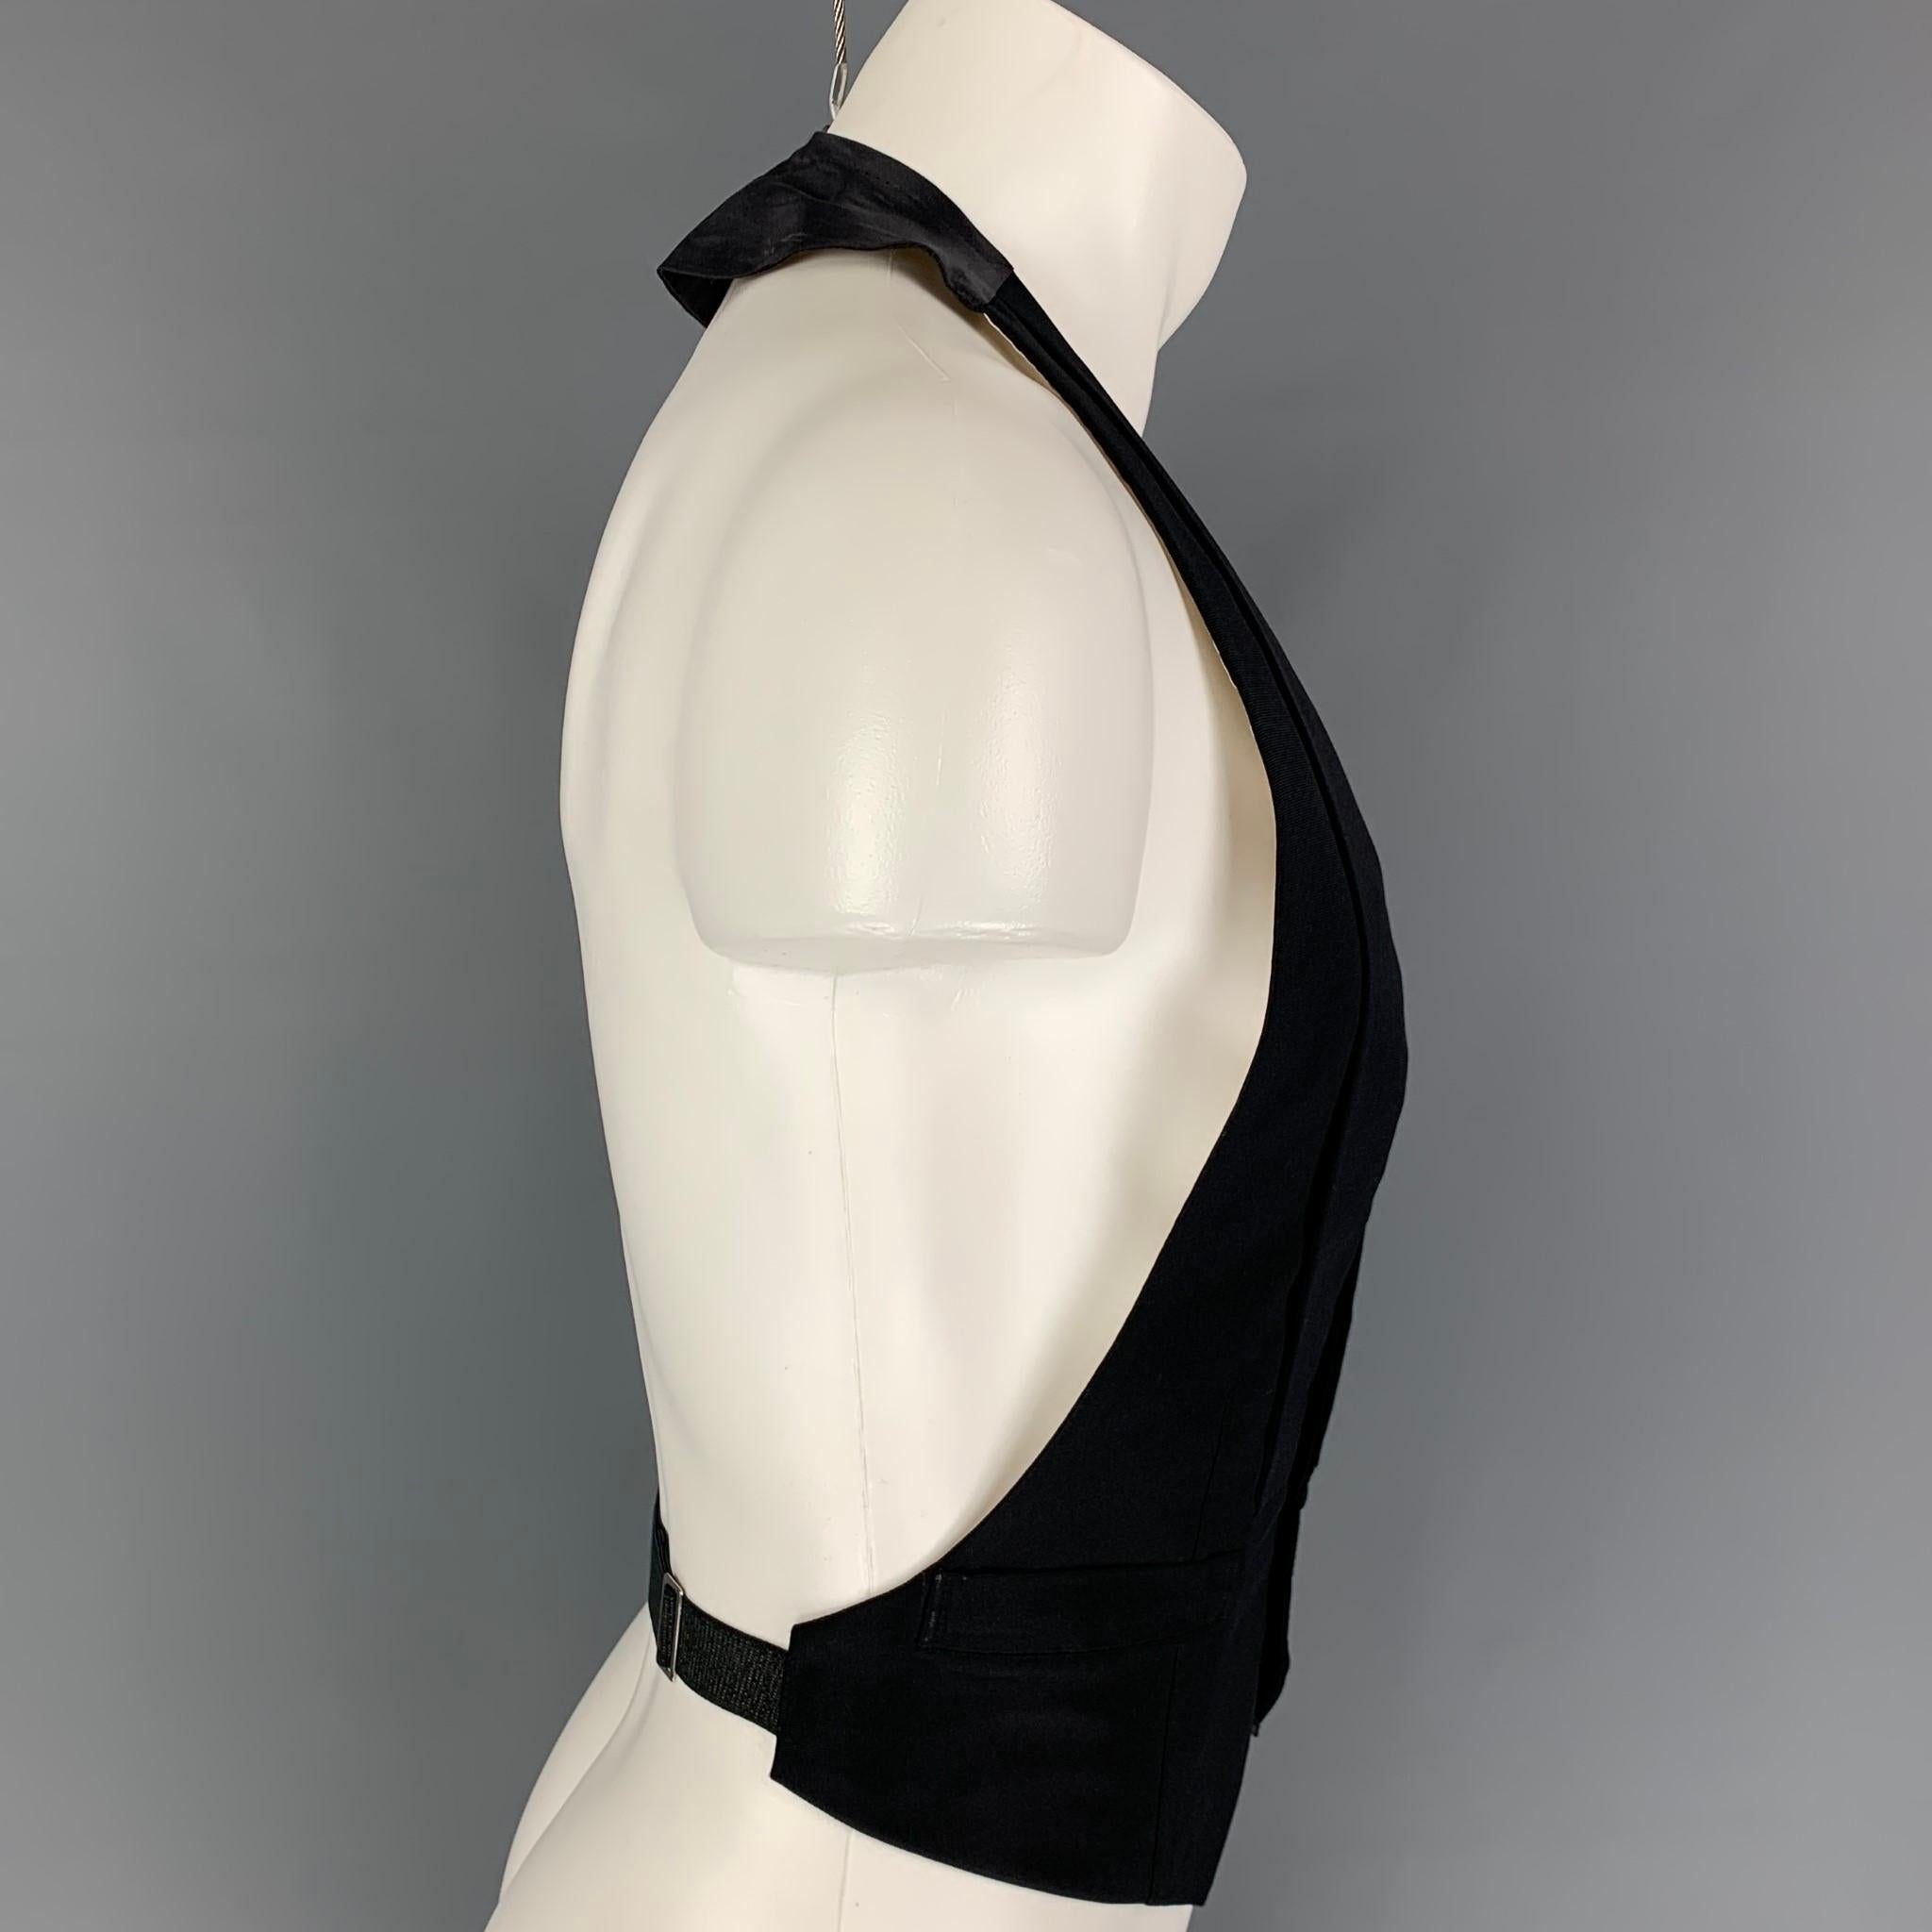 Custom Made HENRY POOLE & Co. of Savile Row tuxedo vest comes in a black silk featuring a shawl lapel style, slit pockets, open back, and a buttoned closure. Made in England.

Excellent Pre-Owned Condition. Fabric tag removed.
Marked: Size tag